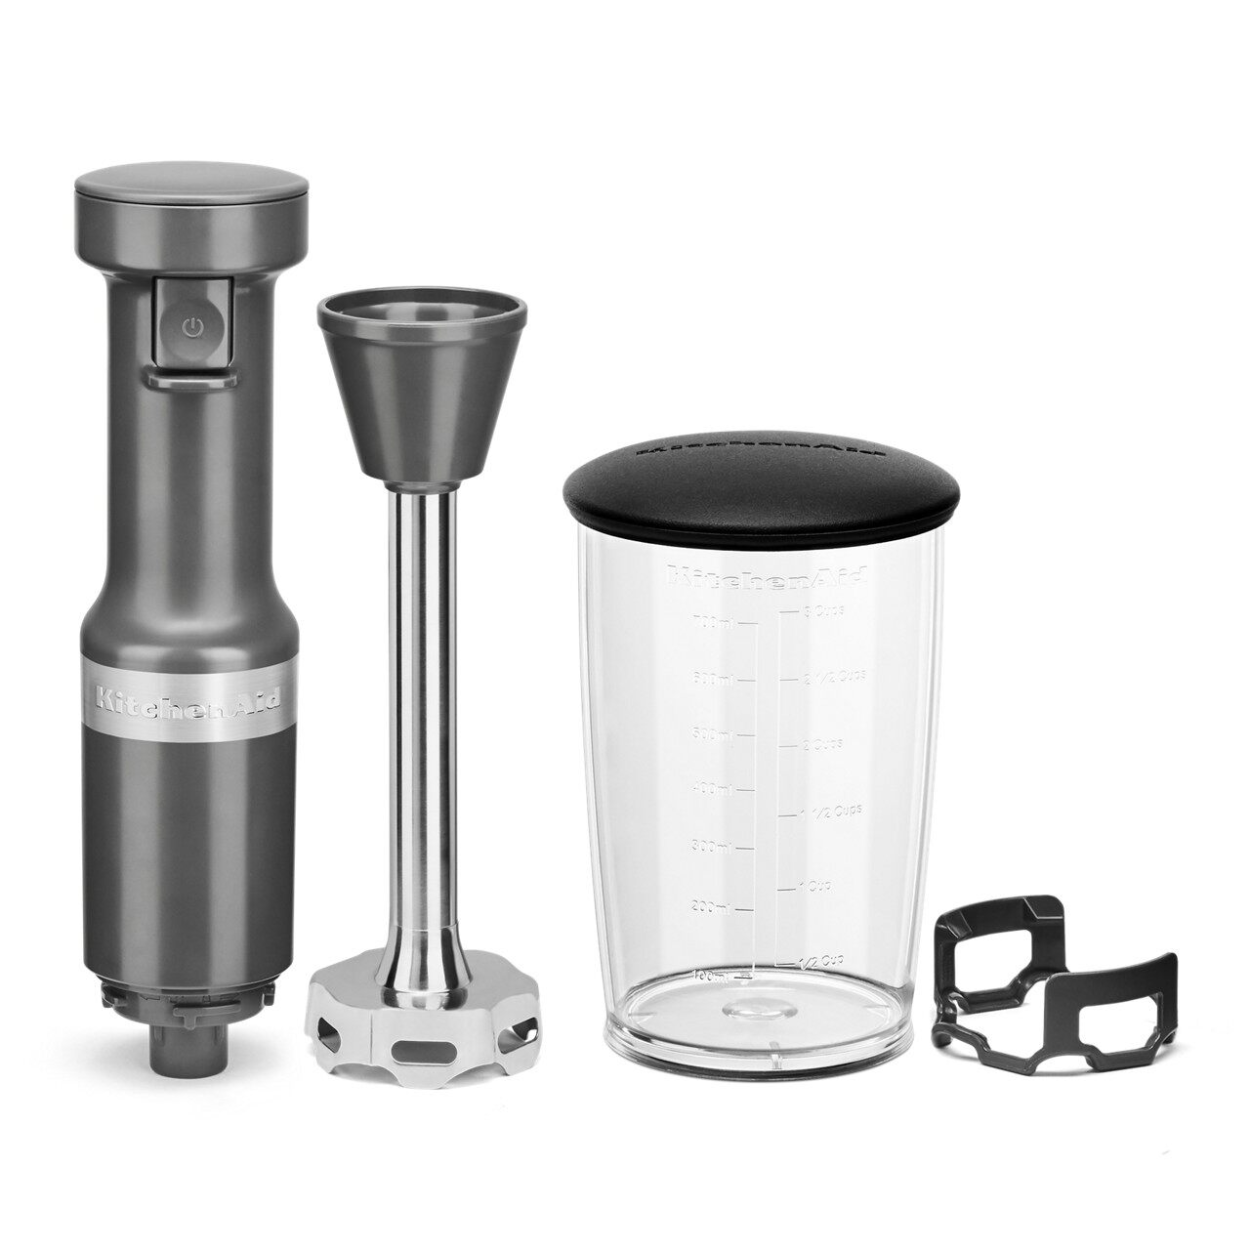 KitchenAid 5~Speed Hand Blender Review - not just baked